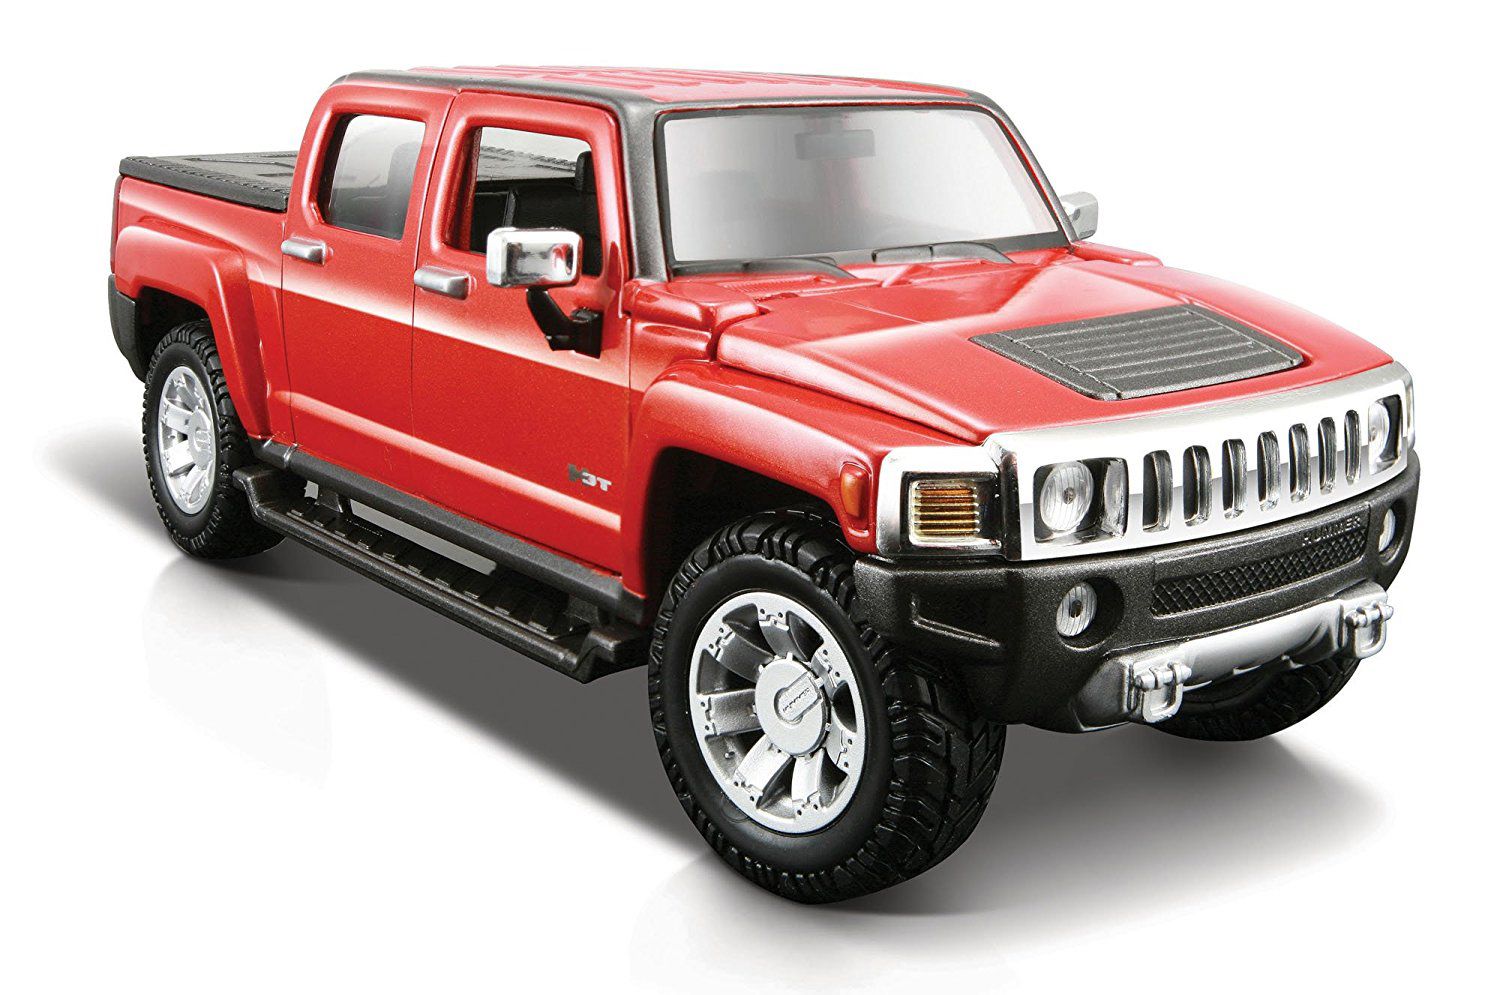 Maisto 31286R, Hummer H3T (2009) - Free Price Guide & Review